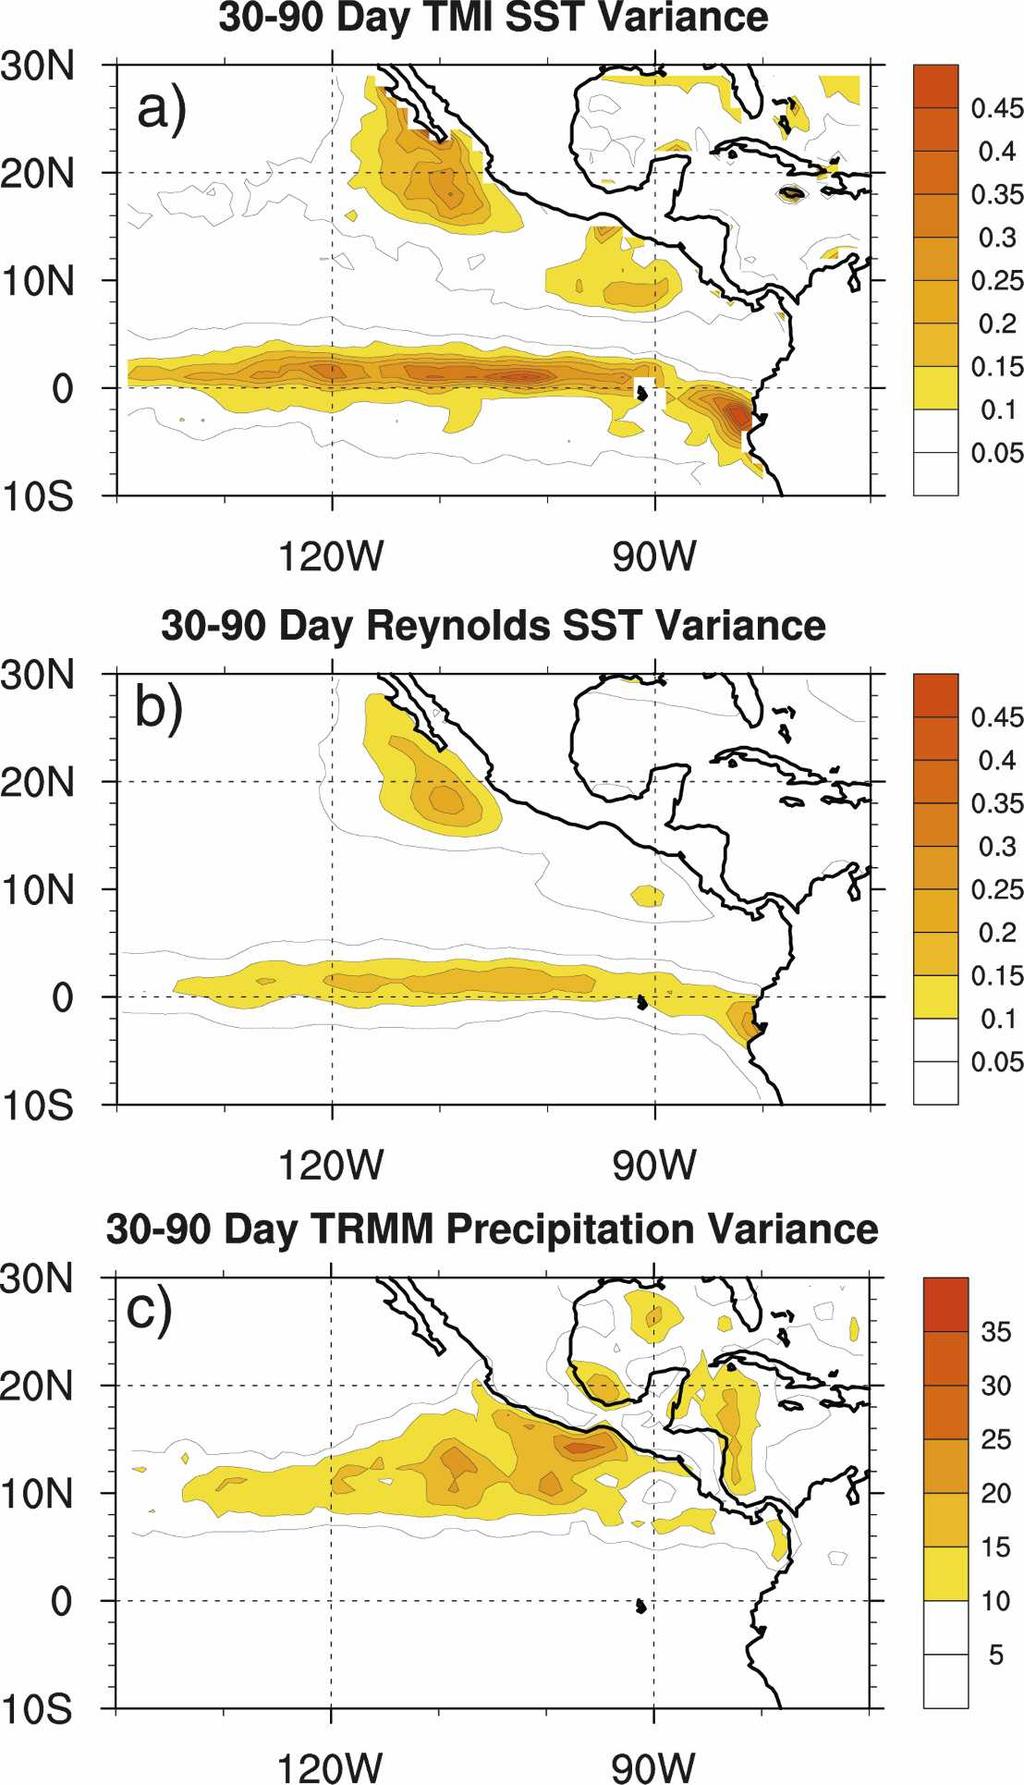 4154 J O U R N A L O F C L I M A T E VOLUME 21 FIG. 3. The 30 90-day June October (a) TMI SST, (b) Reynolds SST, and (c) TRMM precipitation variance calculated during 1998 2005.